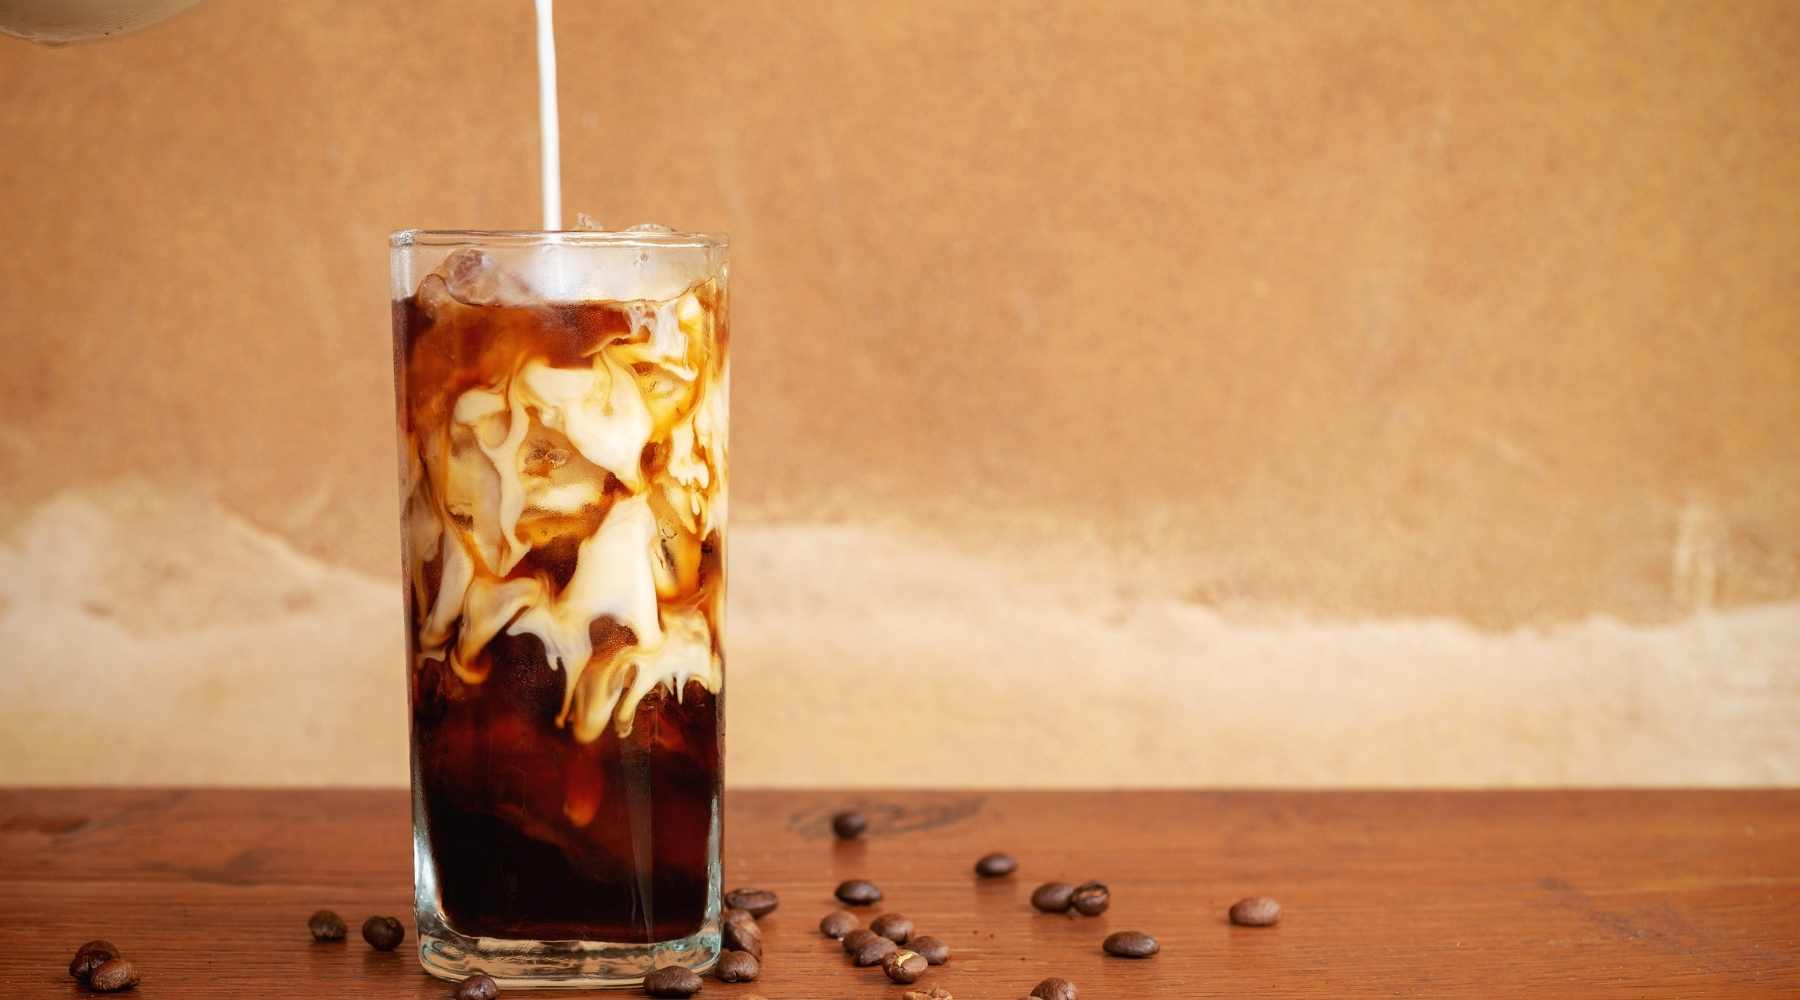 Why choose cold brew